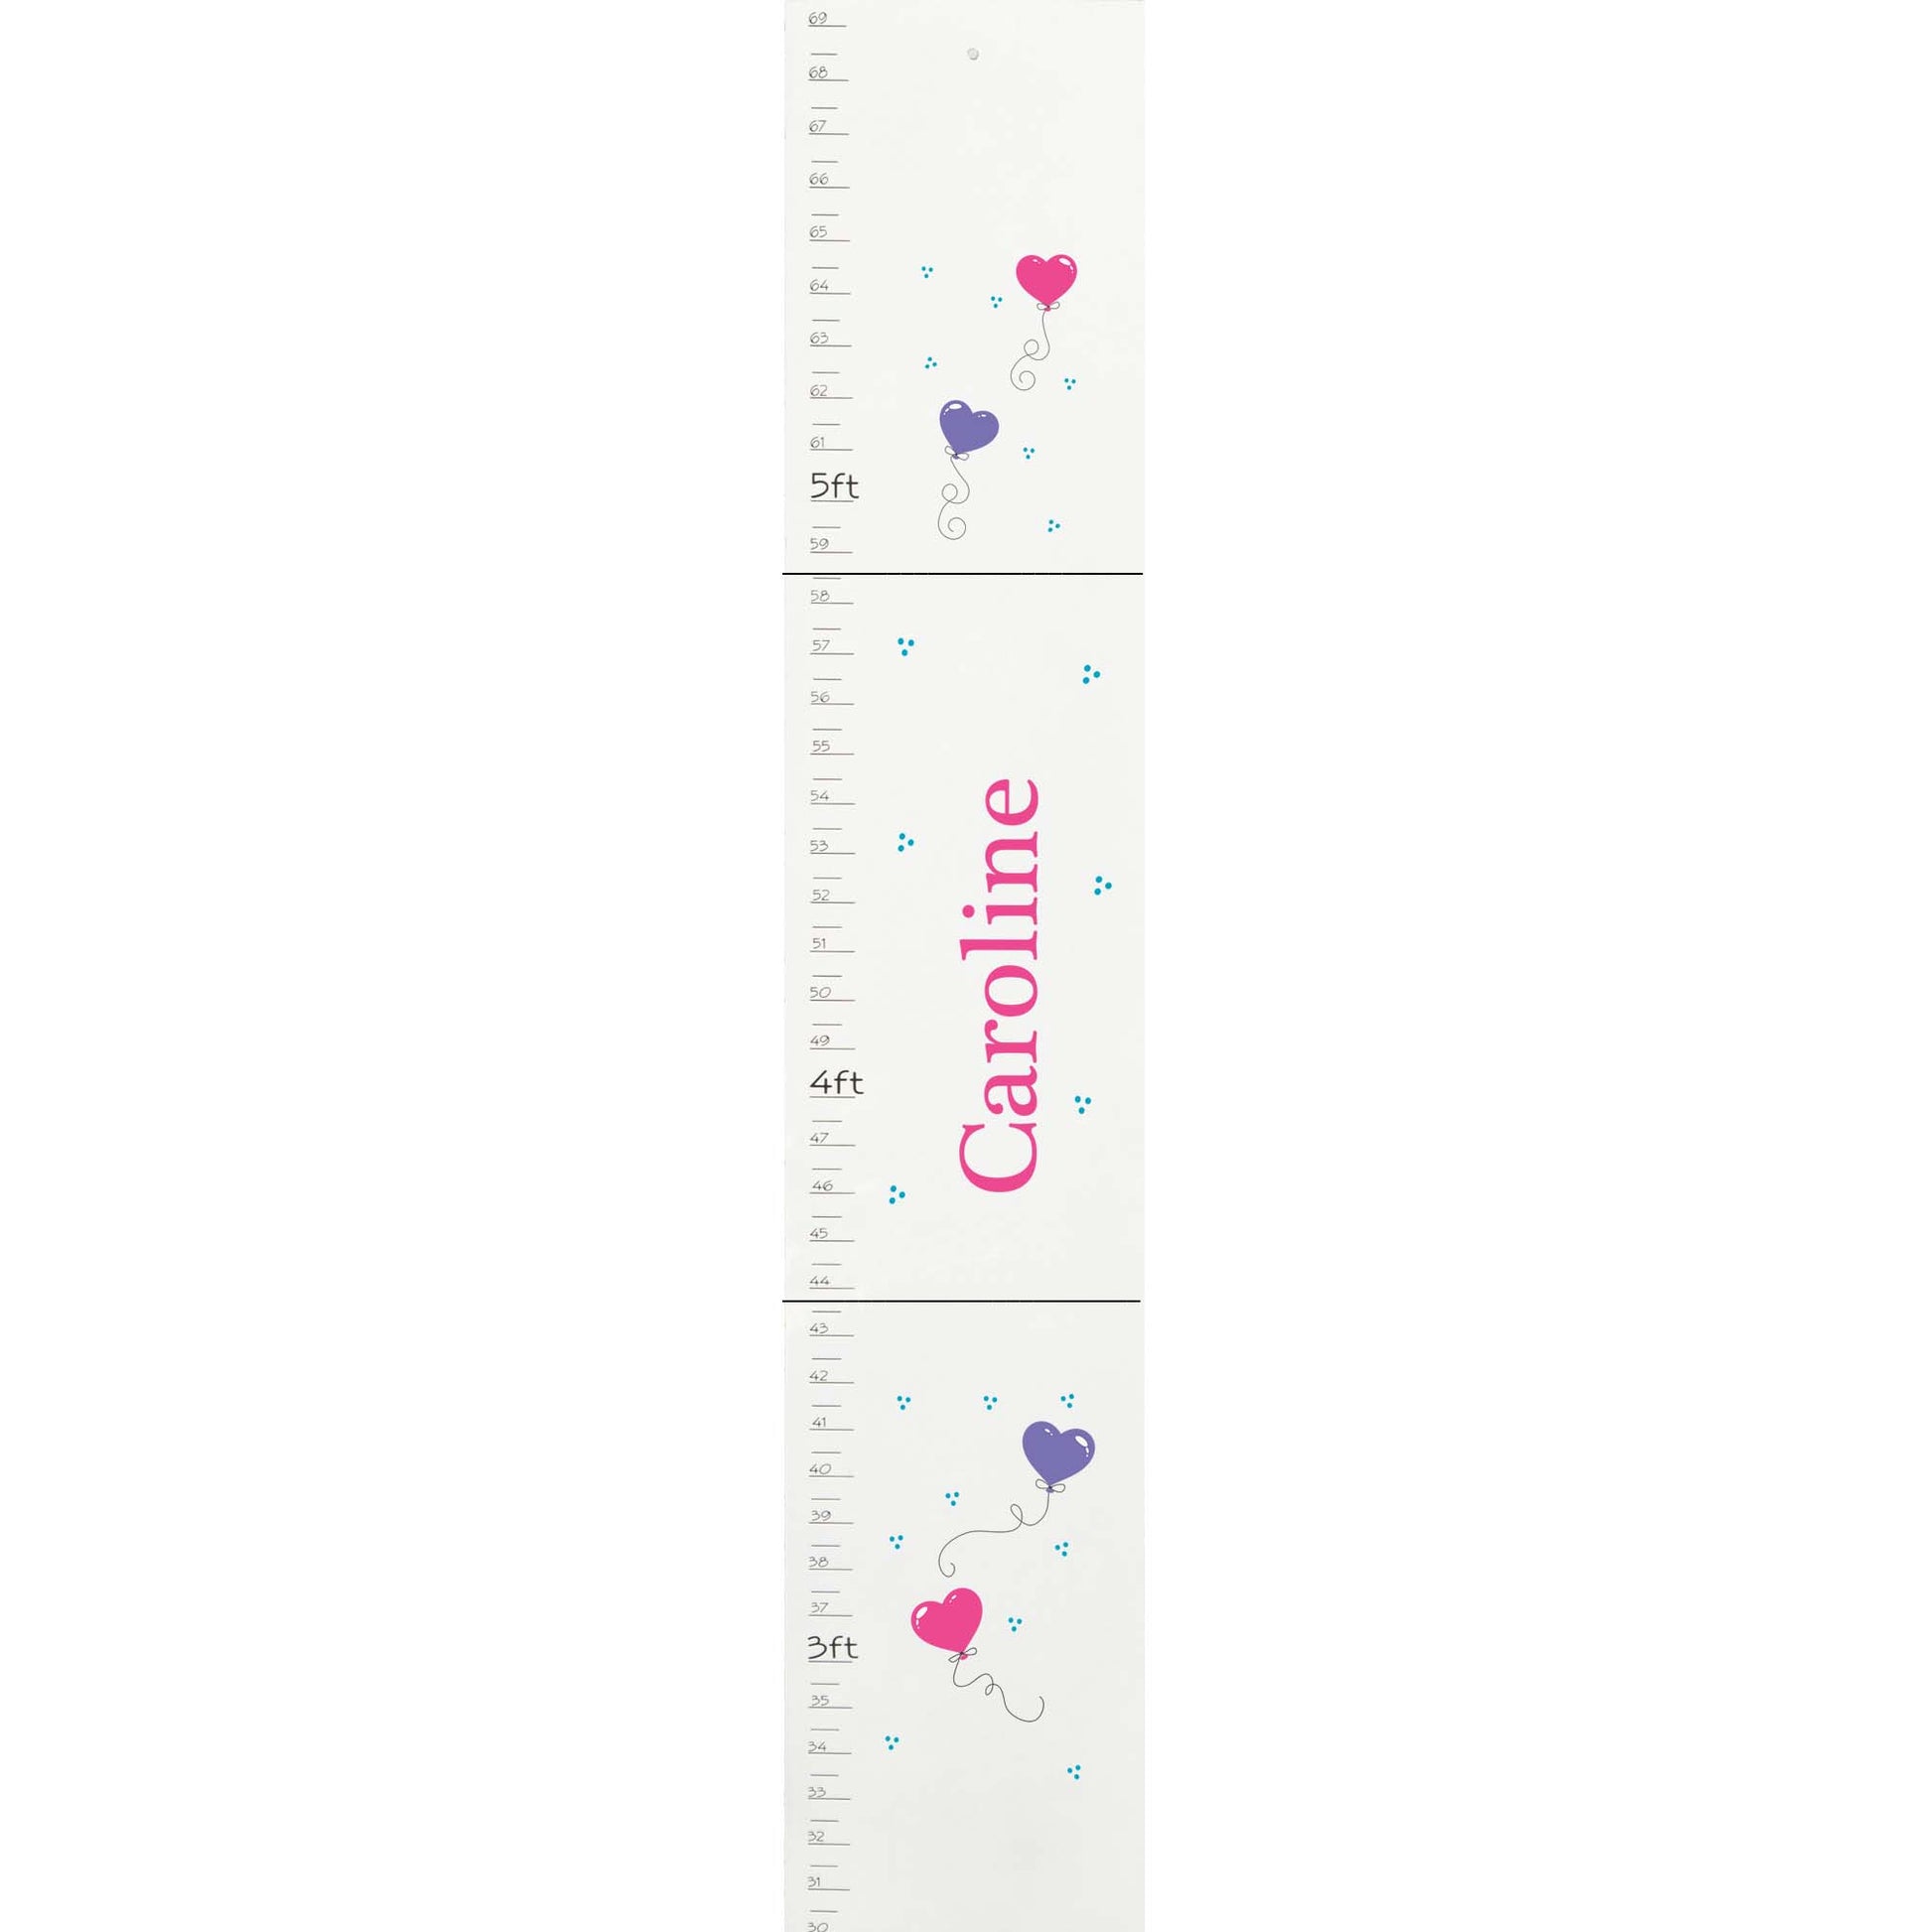 Personalized White Growth Chart With Swan Princess Design